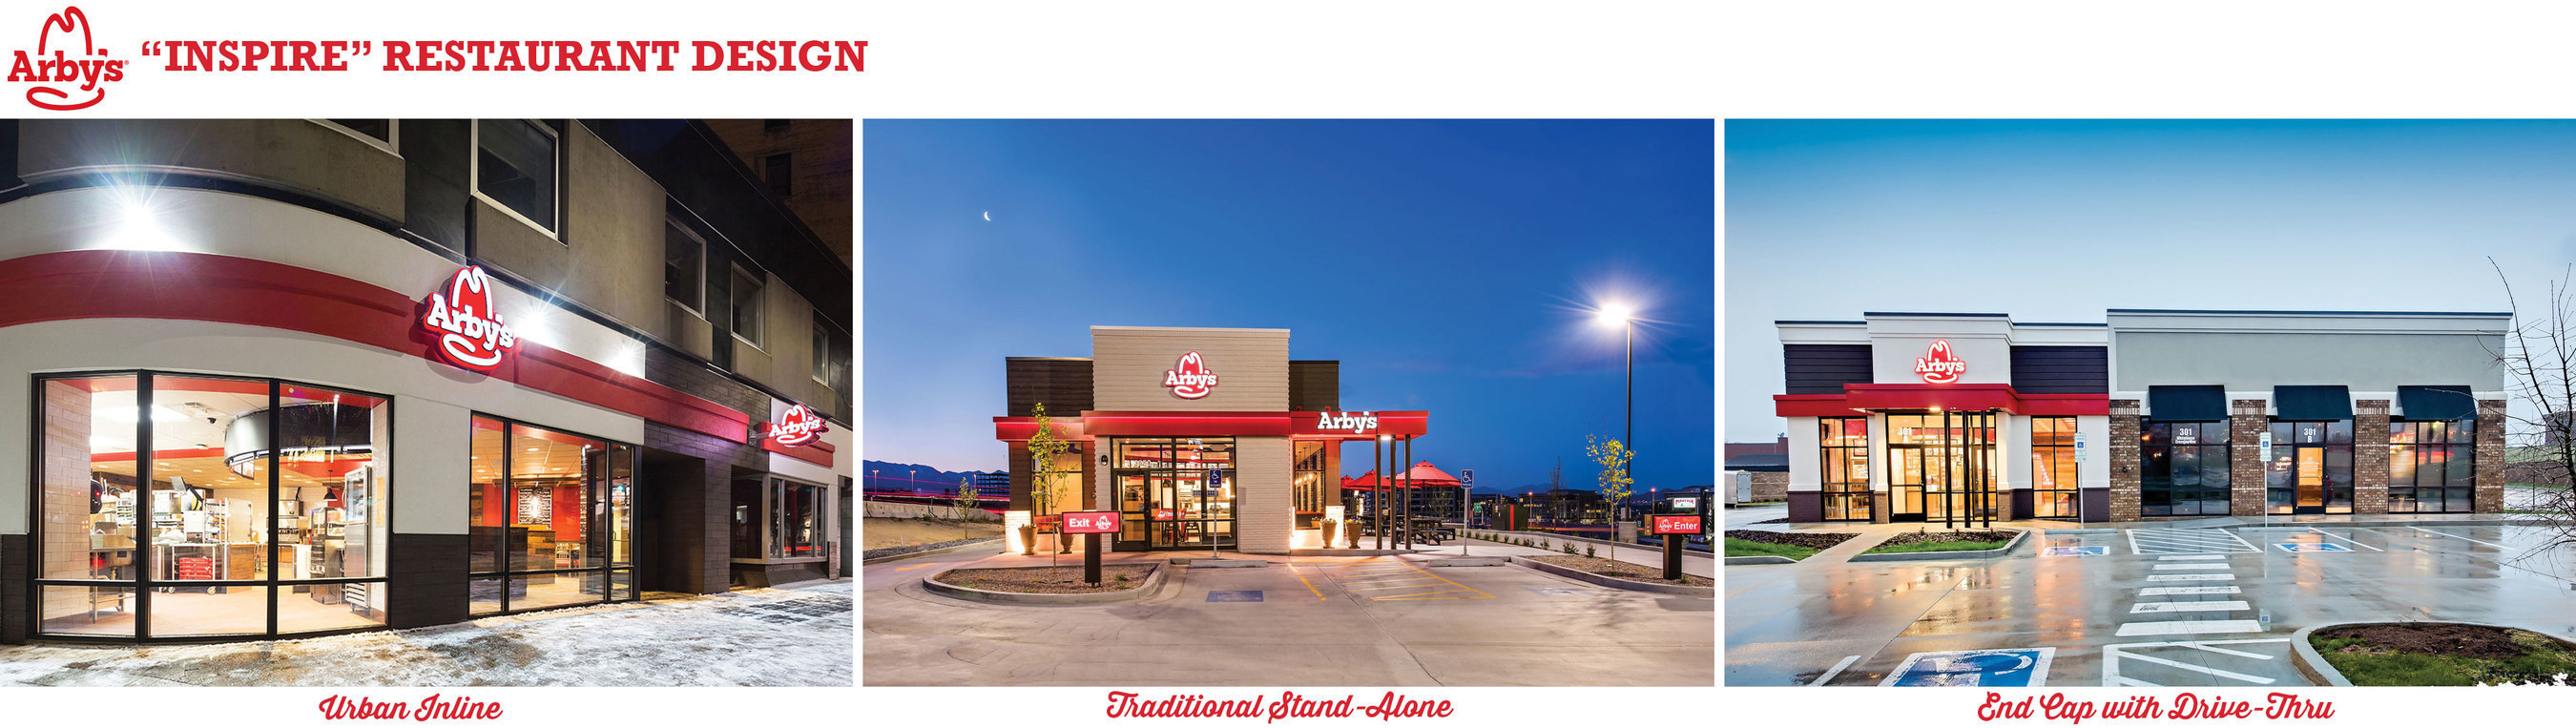 Urban Inline, Traditional Stand-Alone, End Cap with Drive-Thru